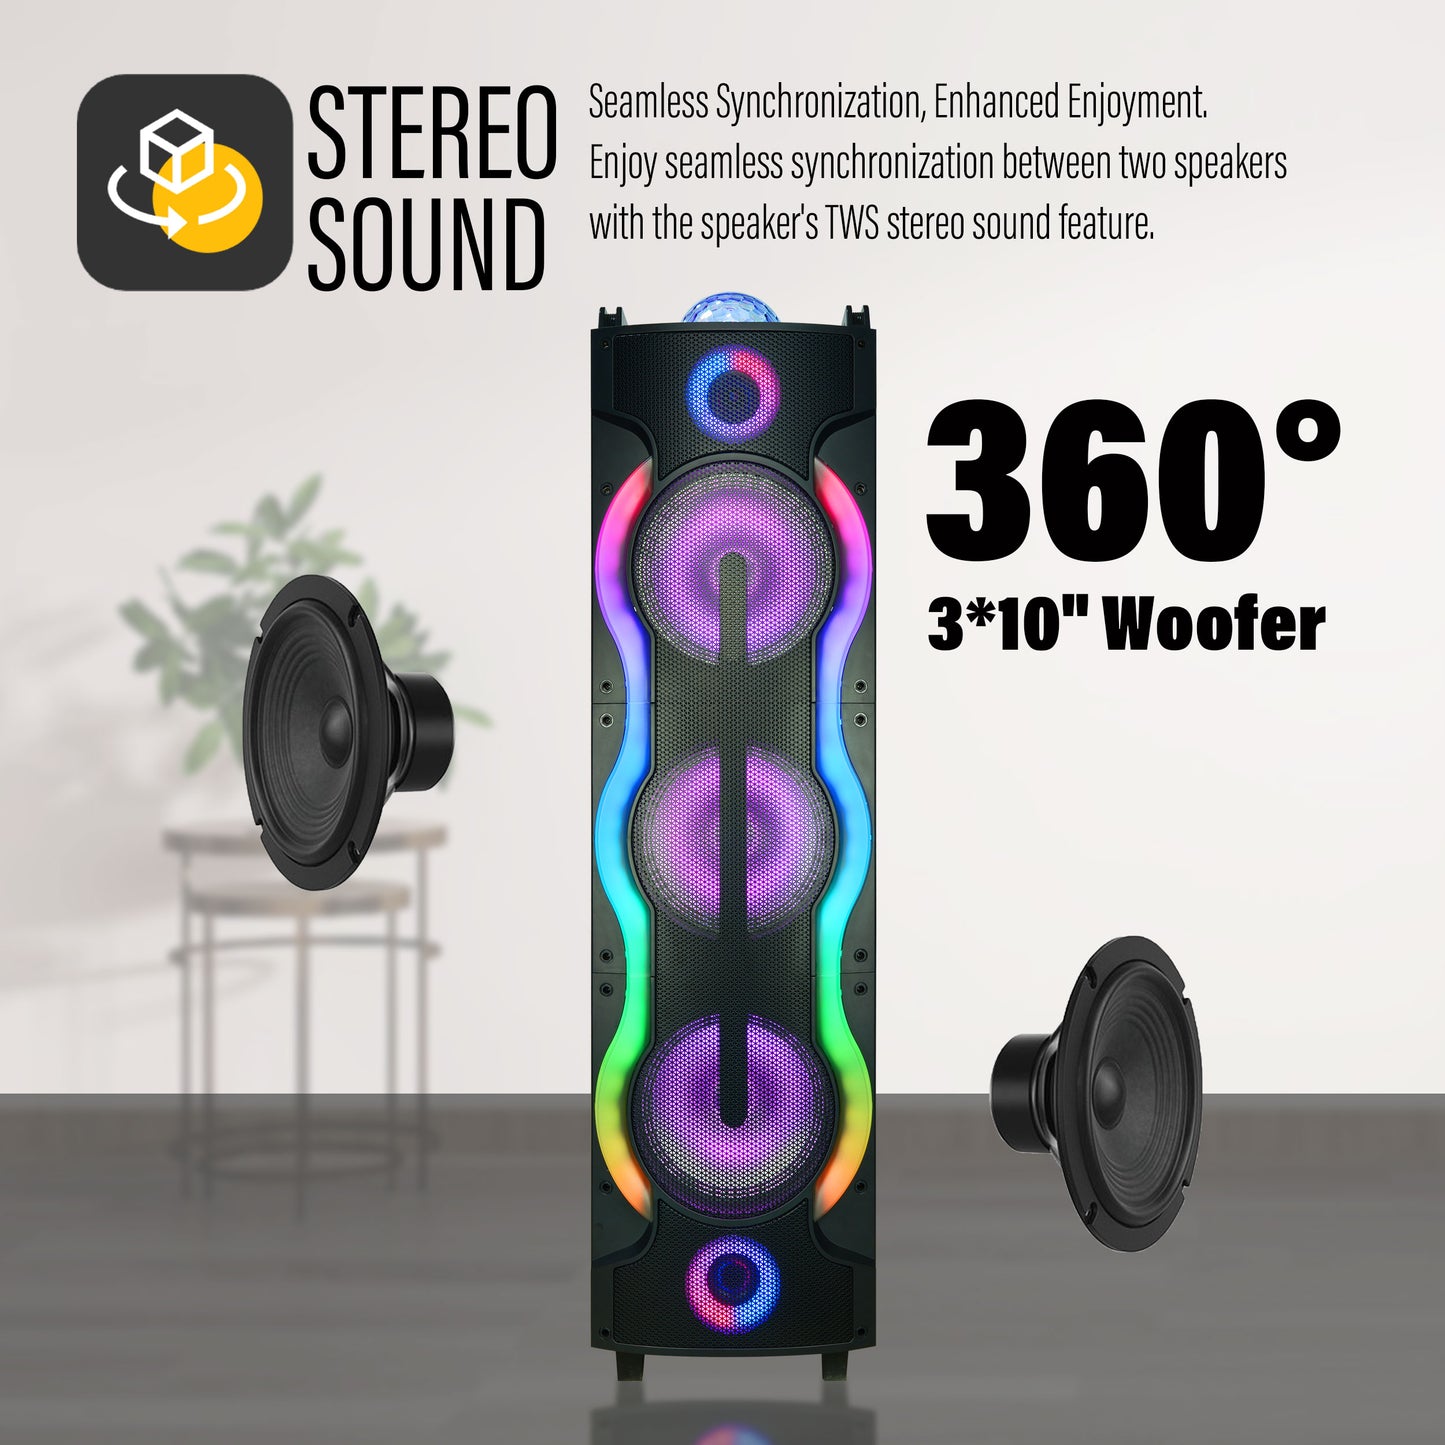 TOPTECH SKY-30 3 * 10''Woofer Portable Bluetooth Speaker with Disco Light,of Blazing Powerful Sound,Precision-Tuned Bluetooth Stereo Sound, 10M Wireless Range,for Home/Outdoor,Gift